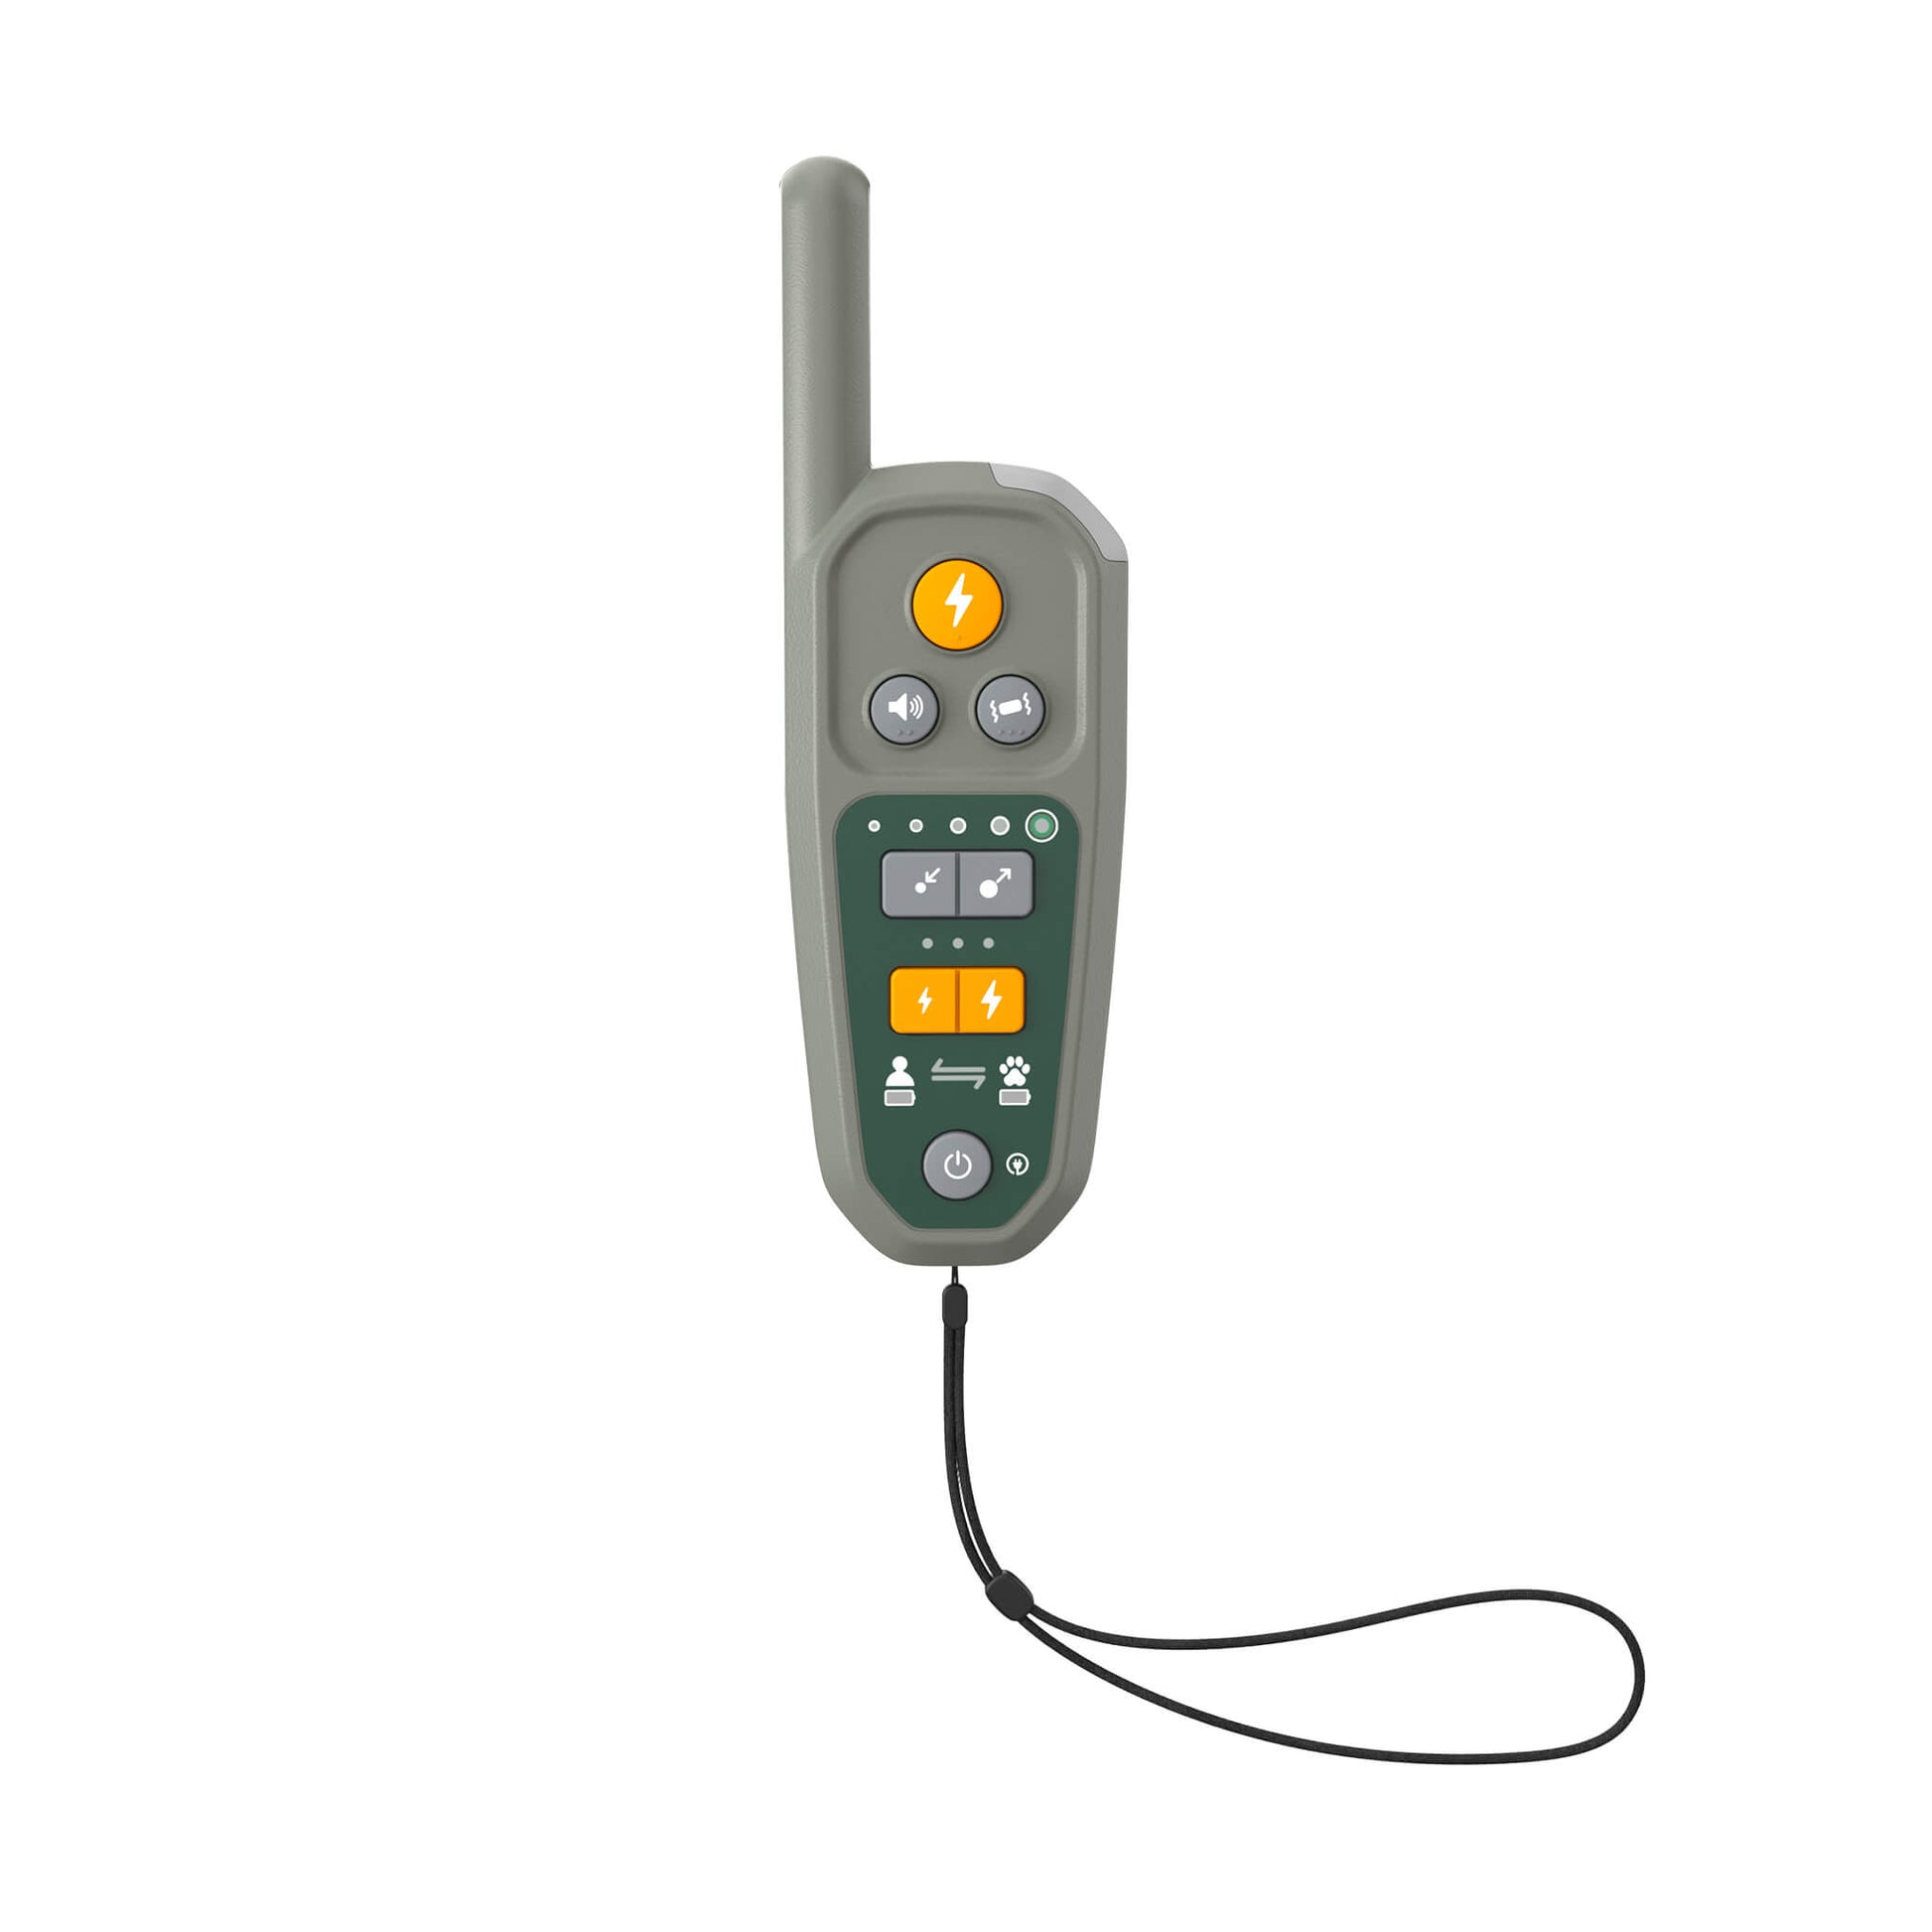 Heel™ ROAM 350™ remote with a lanyard connected on a white background